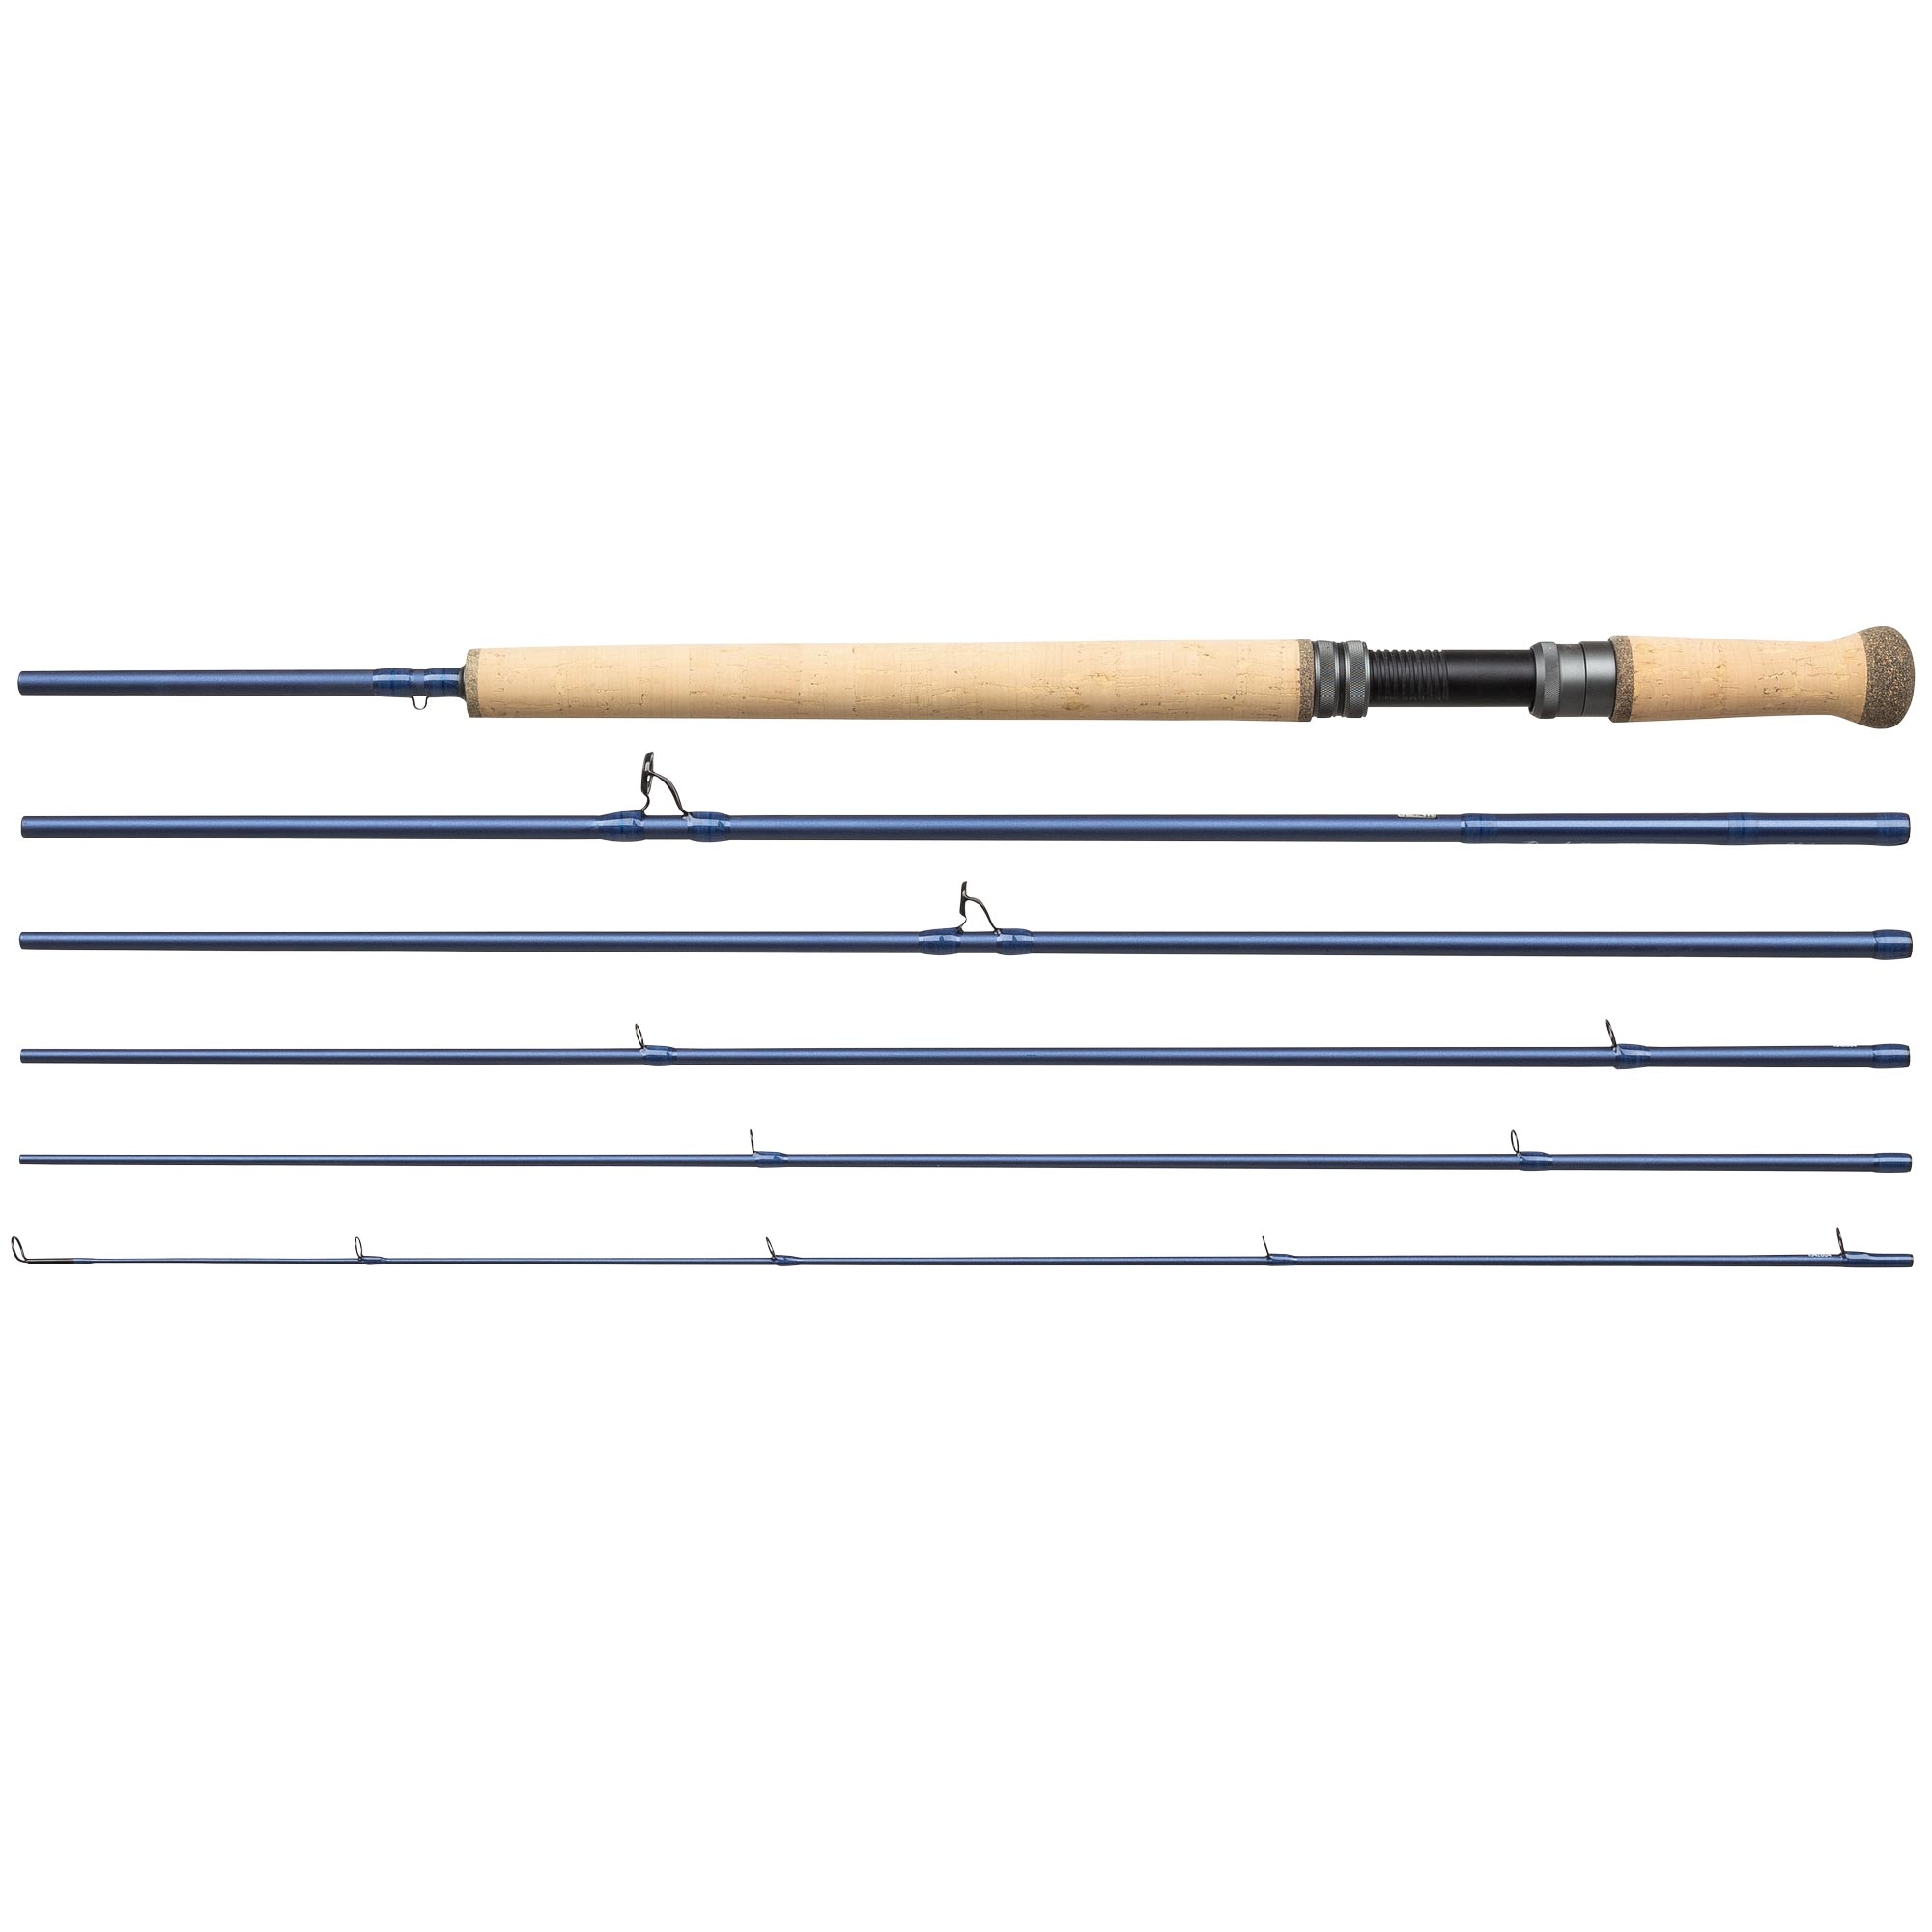 shakespeare salmon fishing rods,Cheap,Sell,OFF 63%,www.syncro